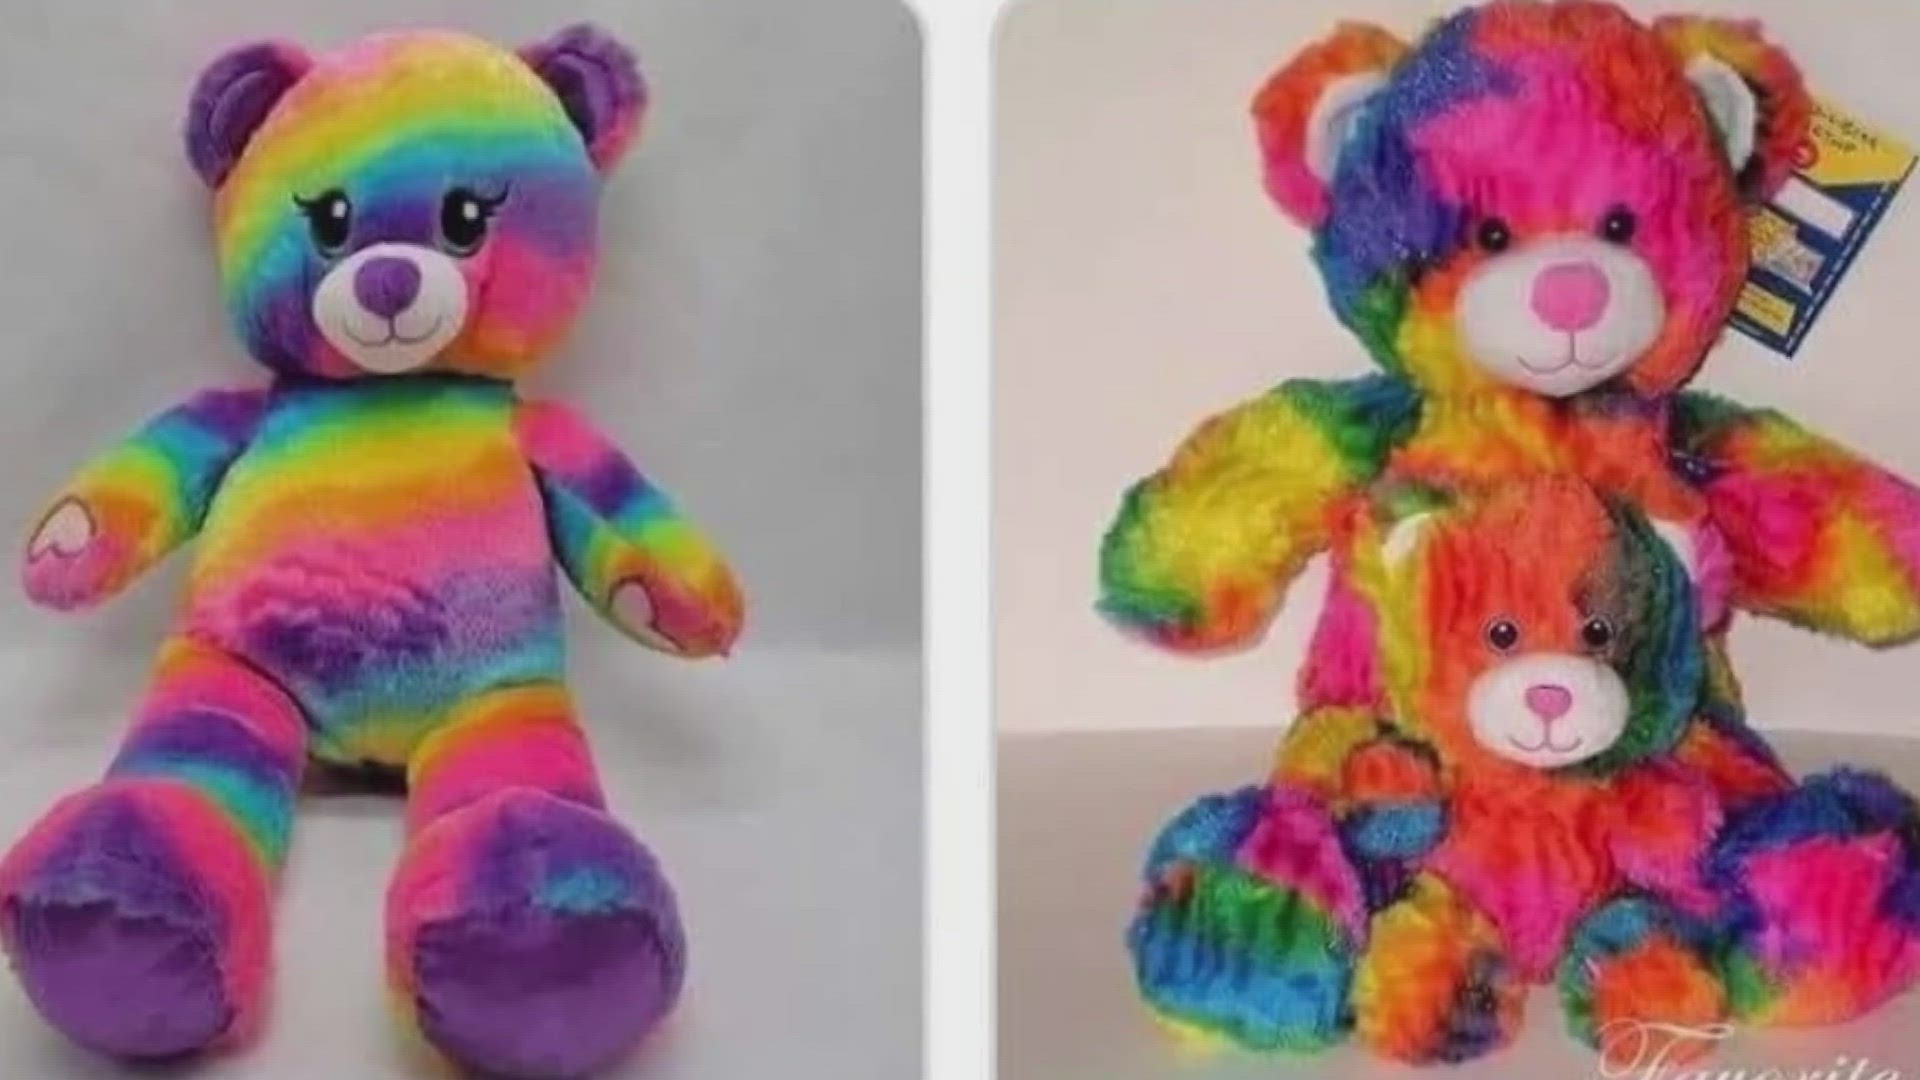 The bear was accidentally donated to Goodwill in Tazewell. According to a note that was left, it is the only thing the 4-year-old girl has to remember her late mom.